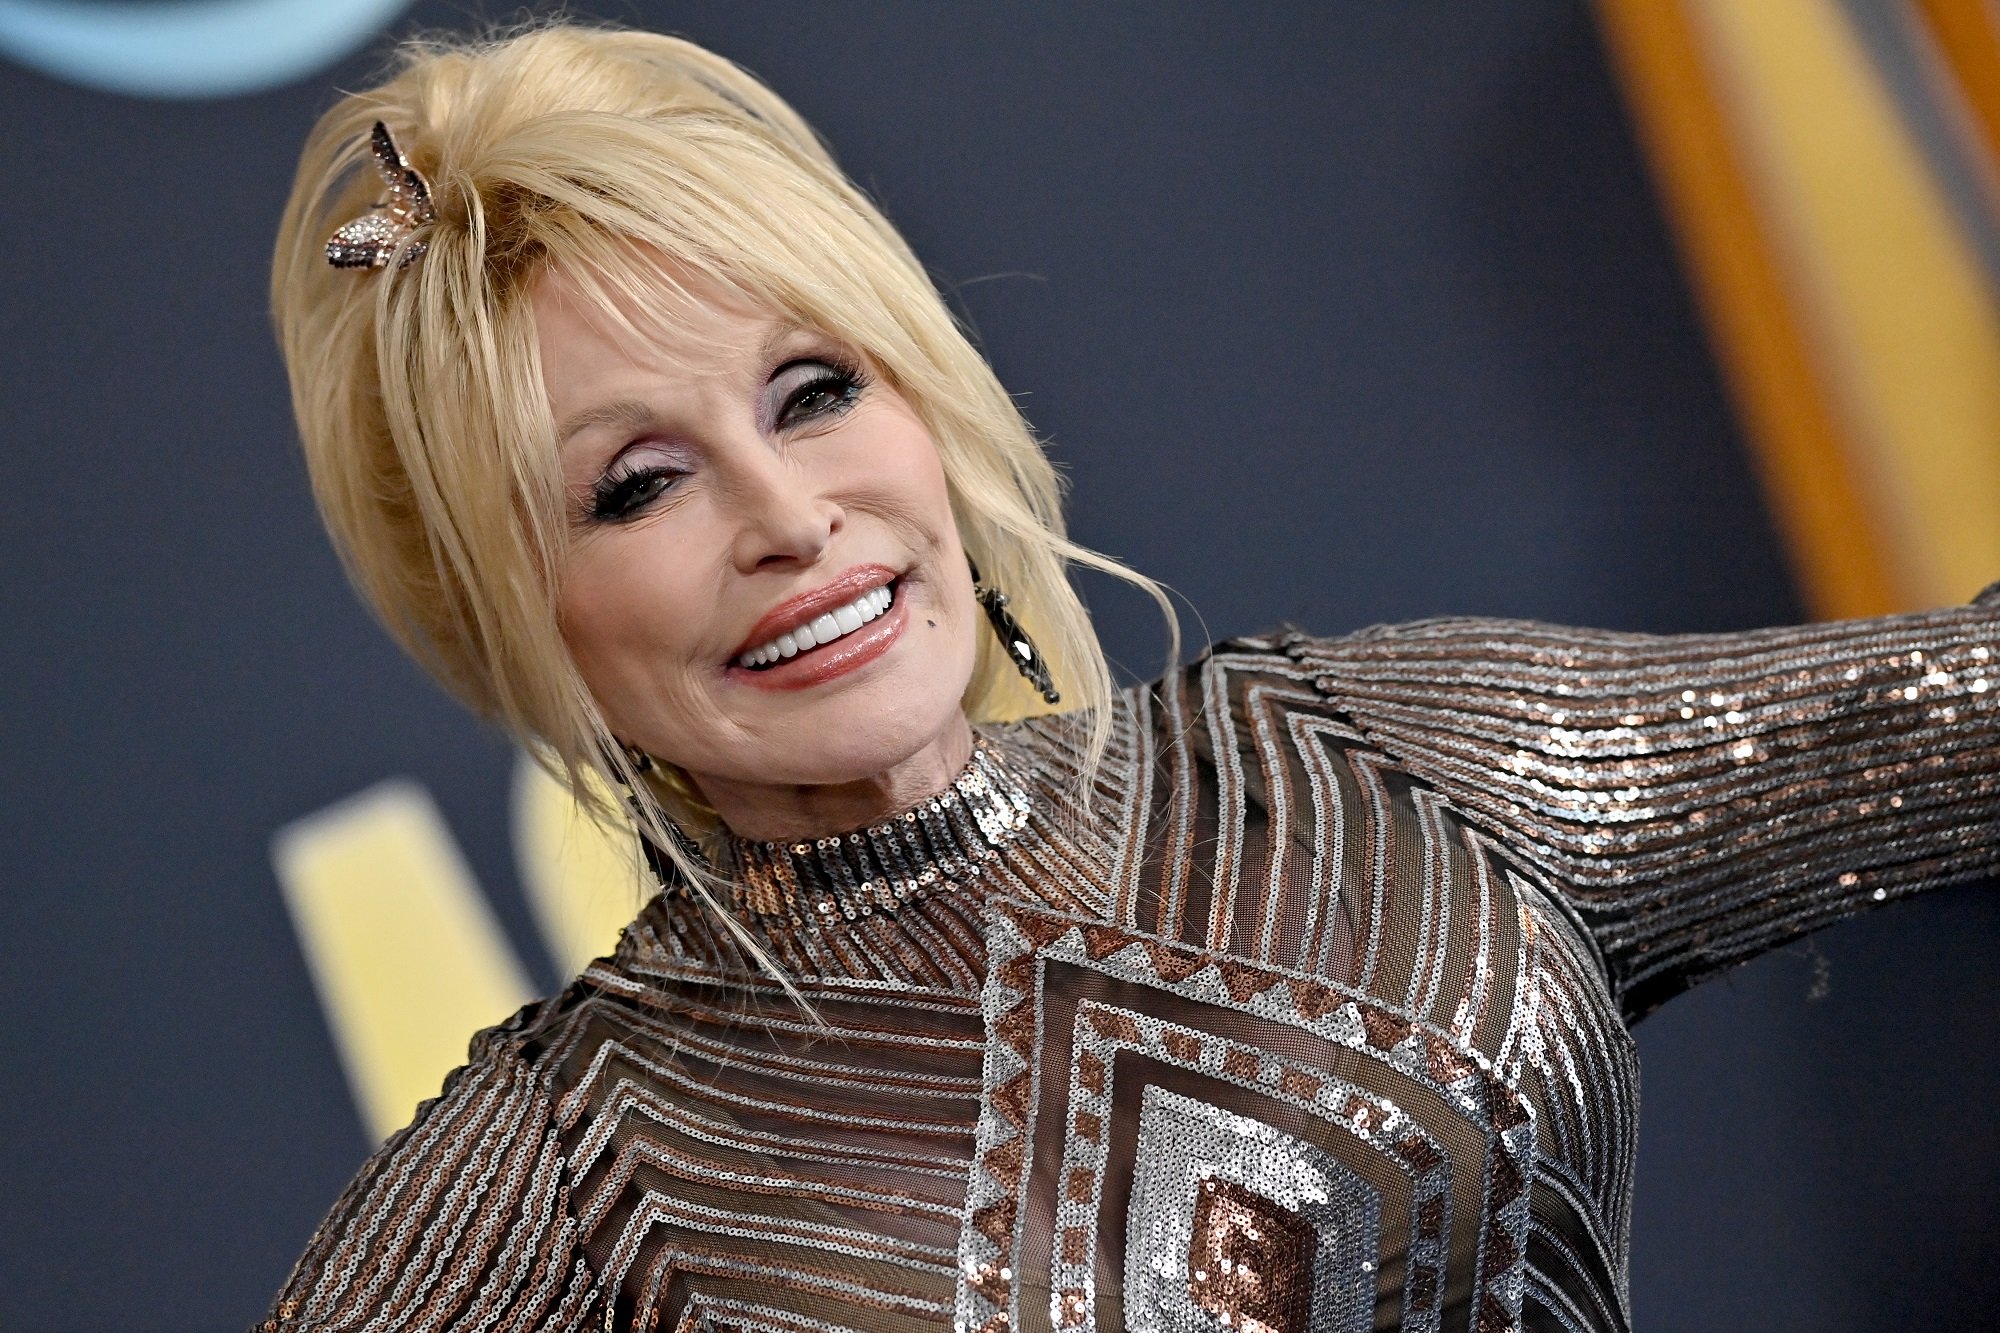 Dolly Parton smiles at the camera wearing a gold and silver dress